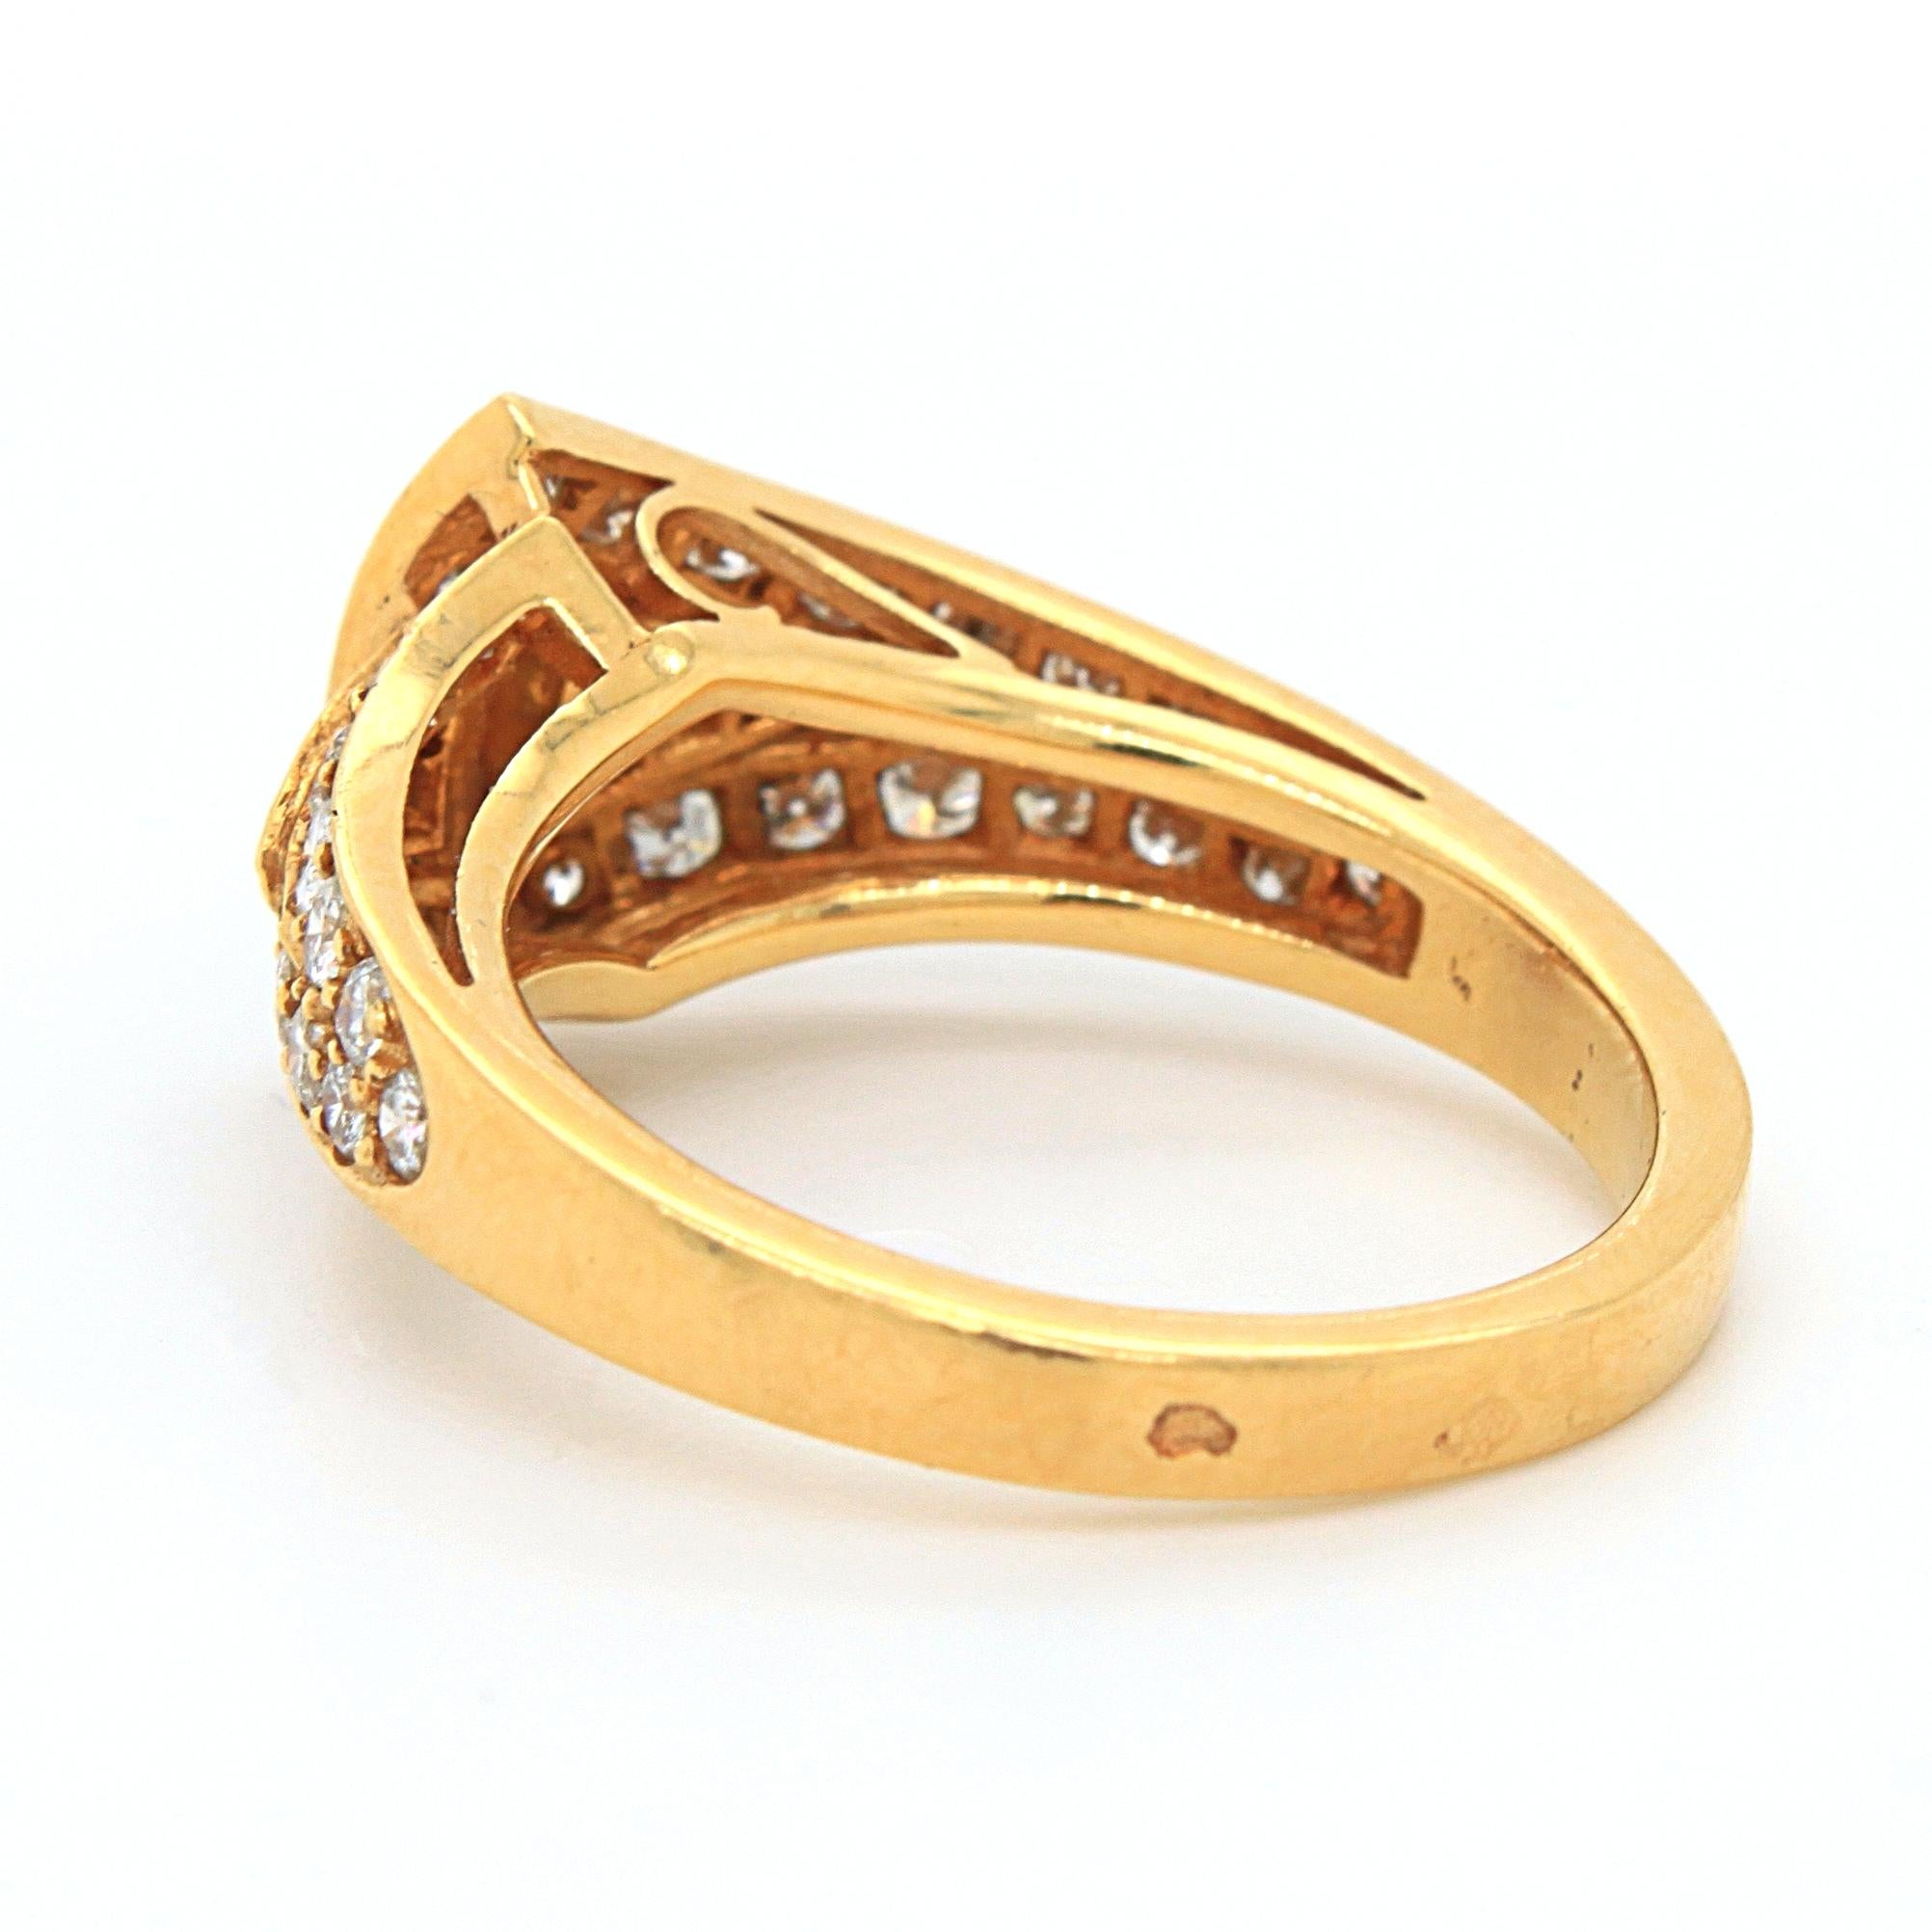 Geometric Diamond Ring in 18k Yellow Gold, by Chaumet, 20th Century 1